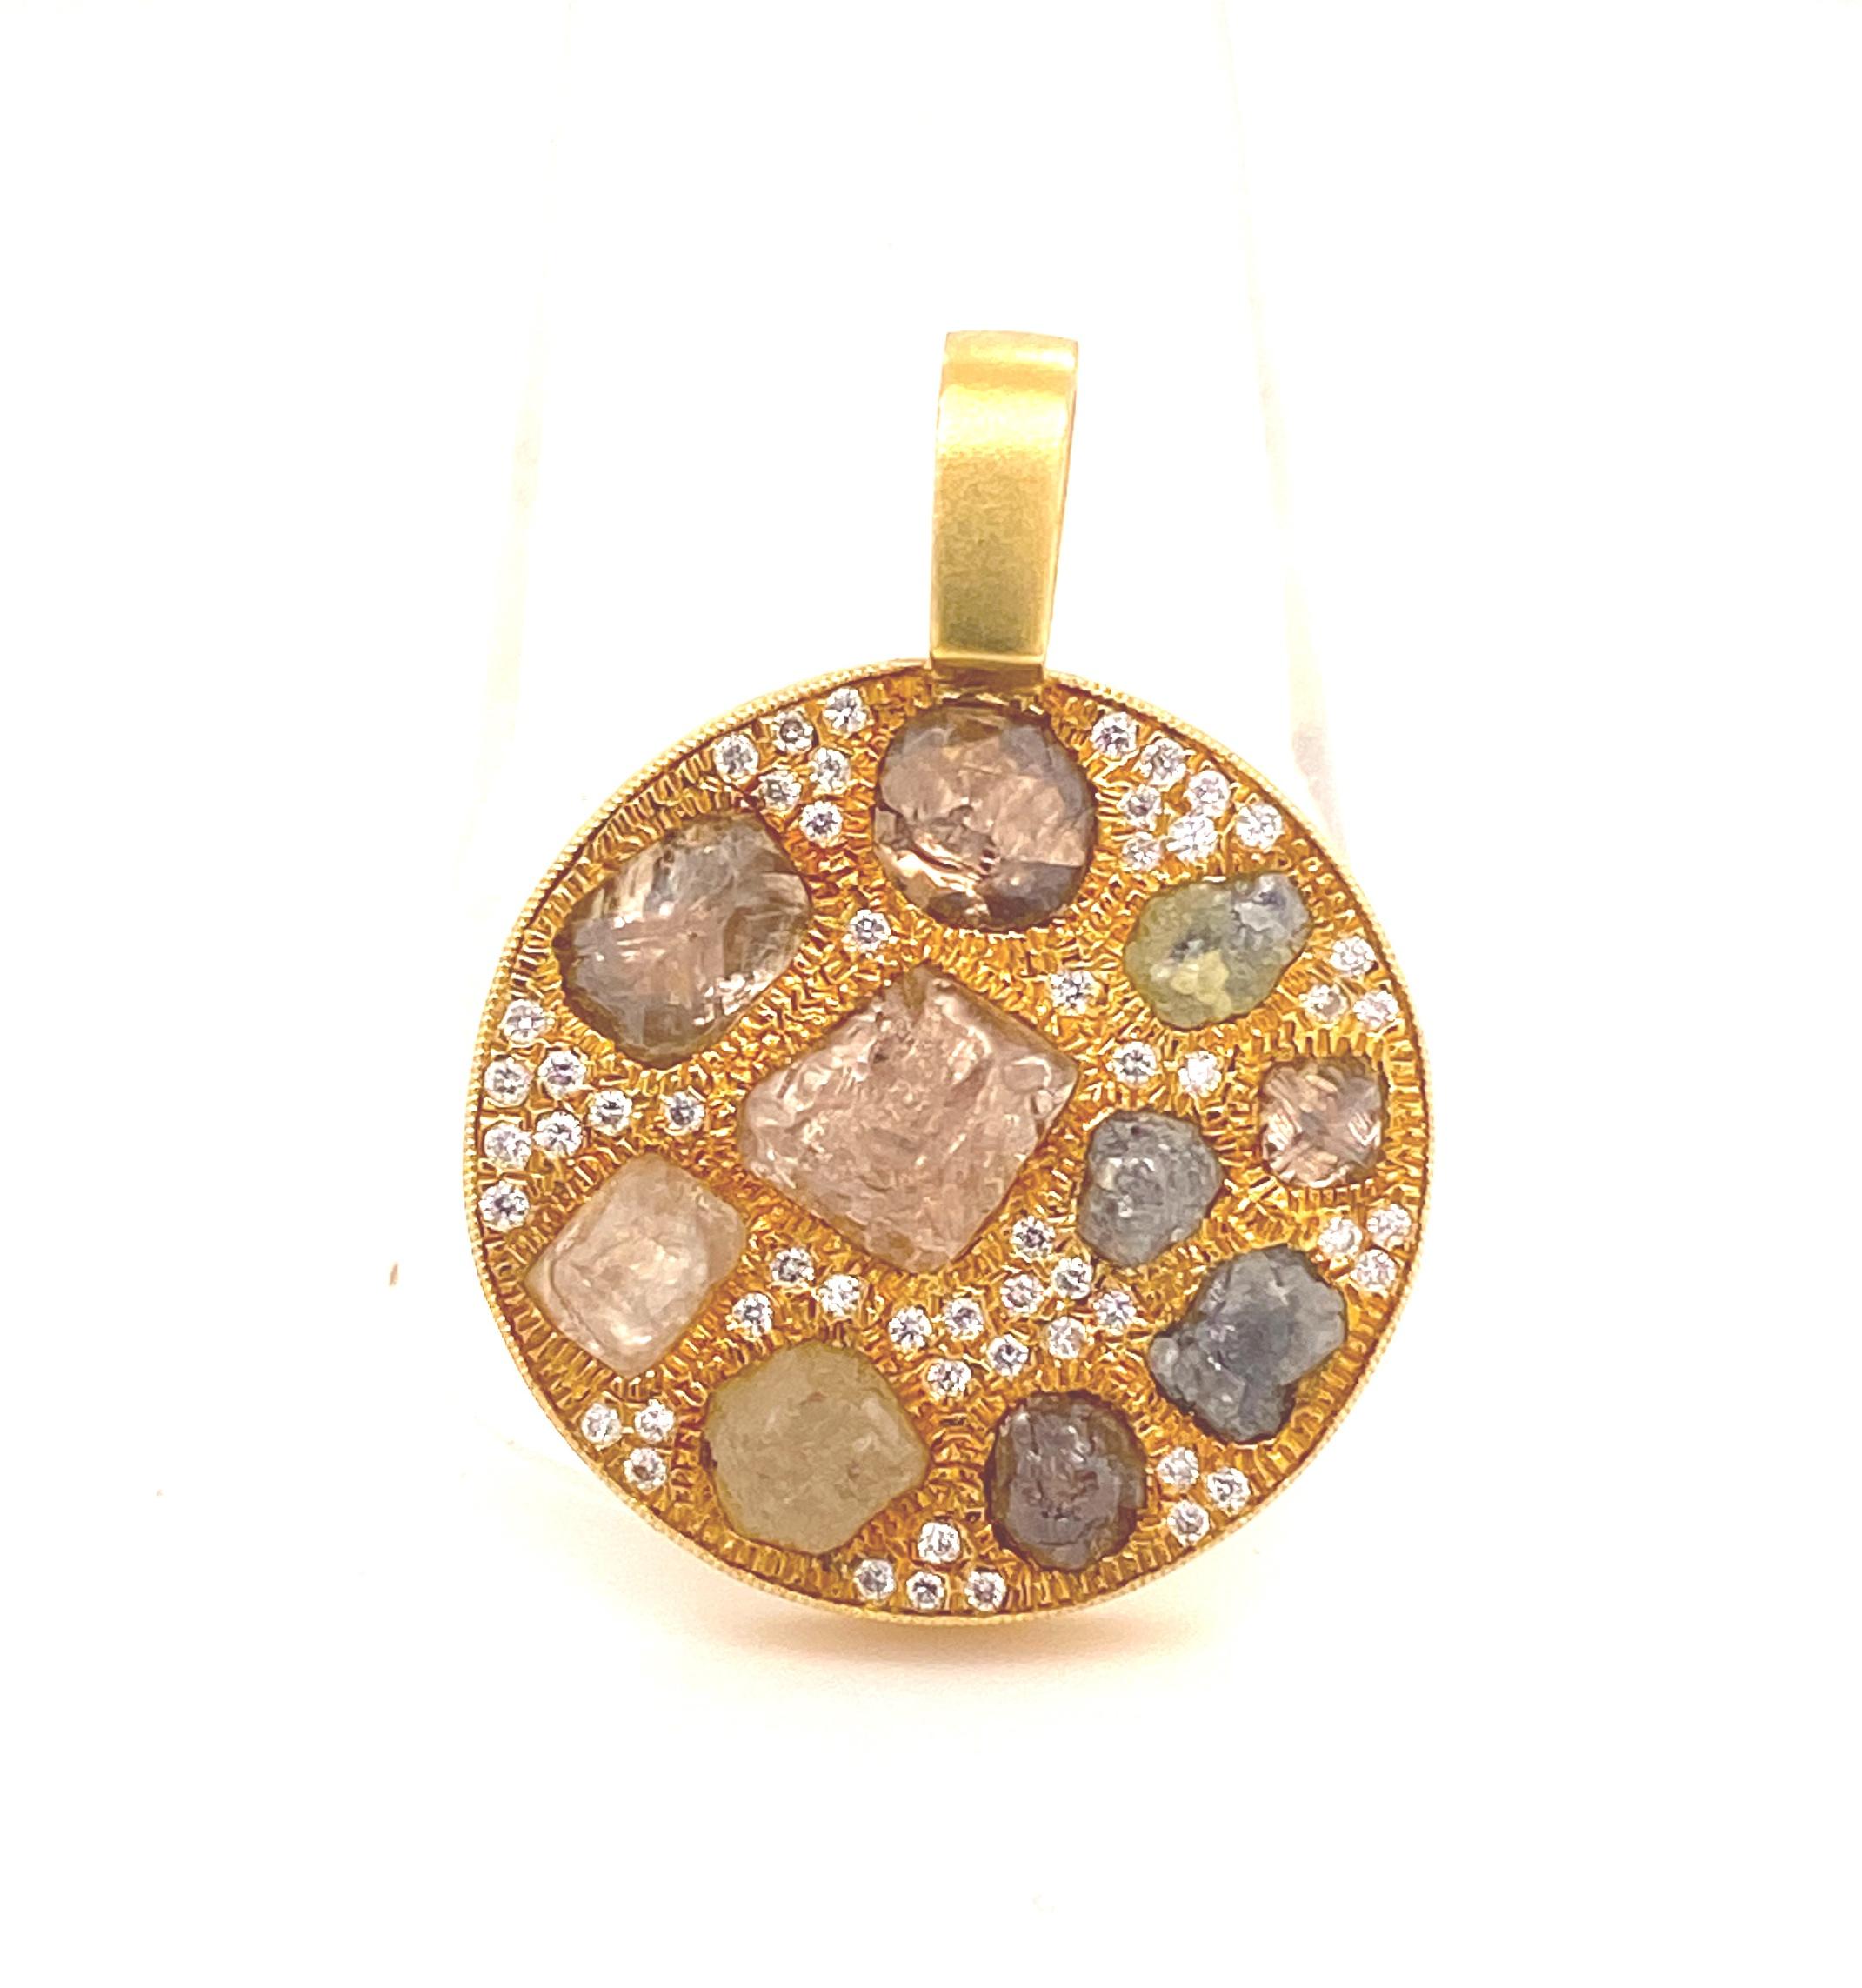 Designer Signed 3.26 Carats Fancy Color Raw Diamonds 18K Gold Pendant. This is a amazing pendant signed SR 18k with the diamond weight 3.26. The pendant has 10 fancy color brown and champagne color raw cut diamonds. The raw diamonds have great